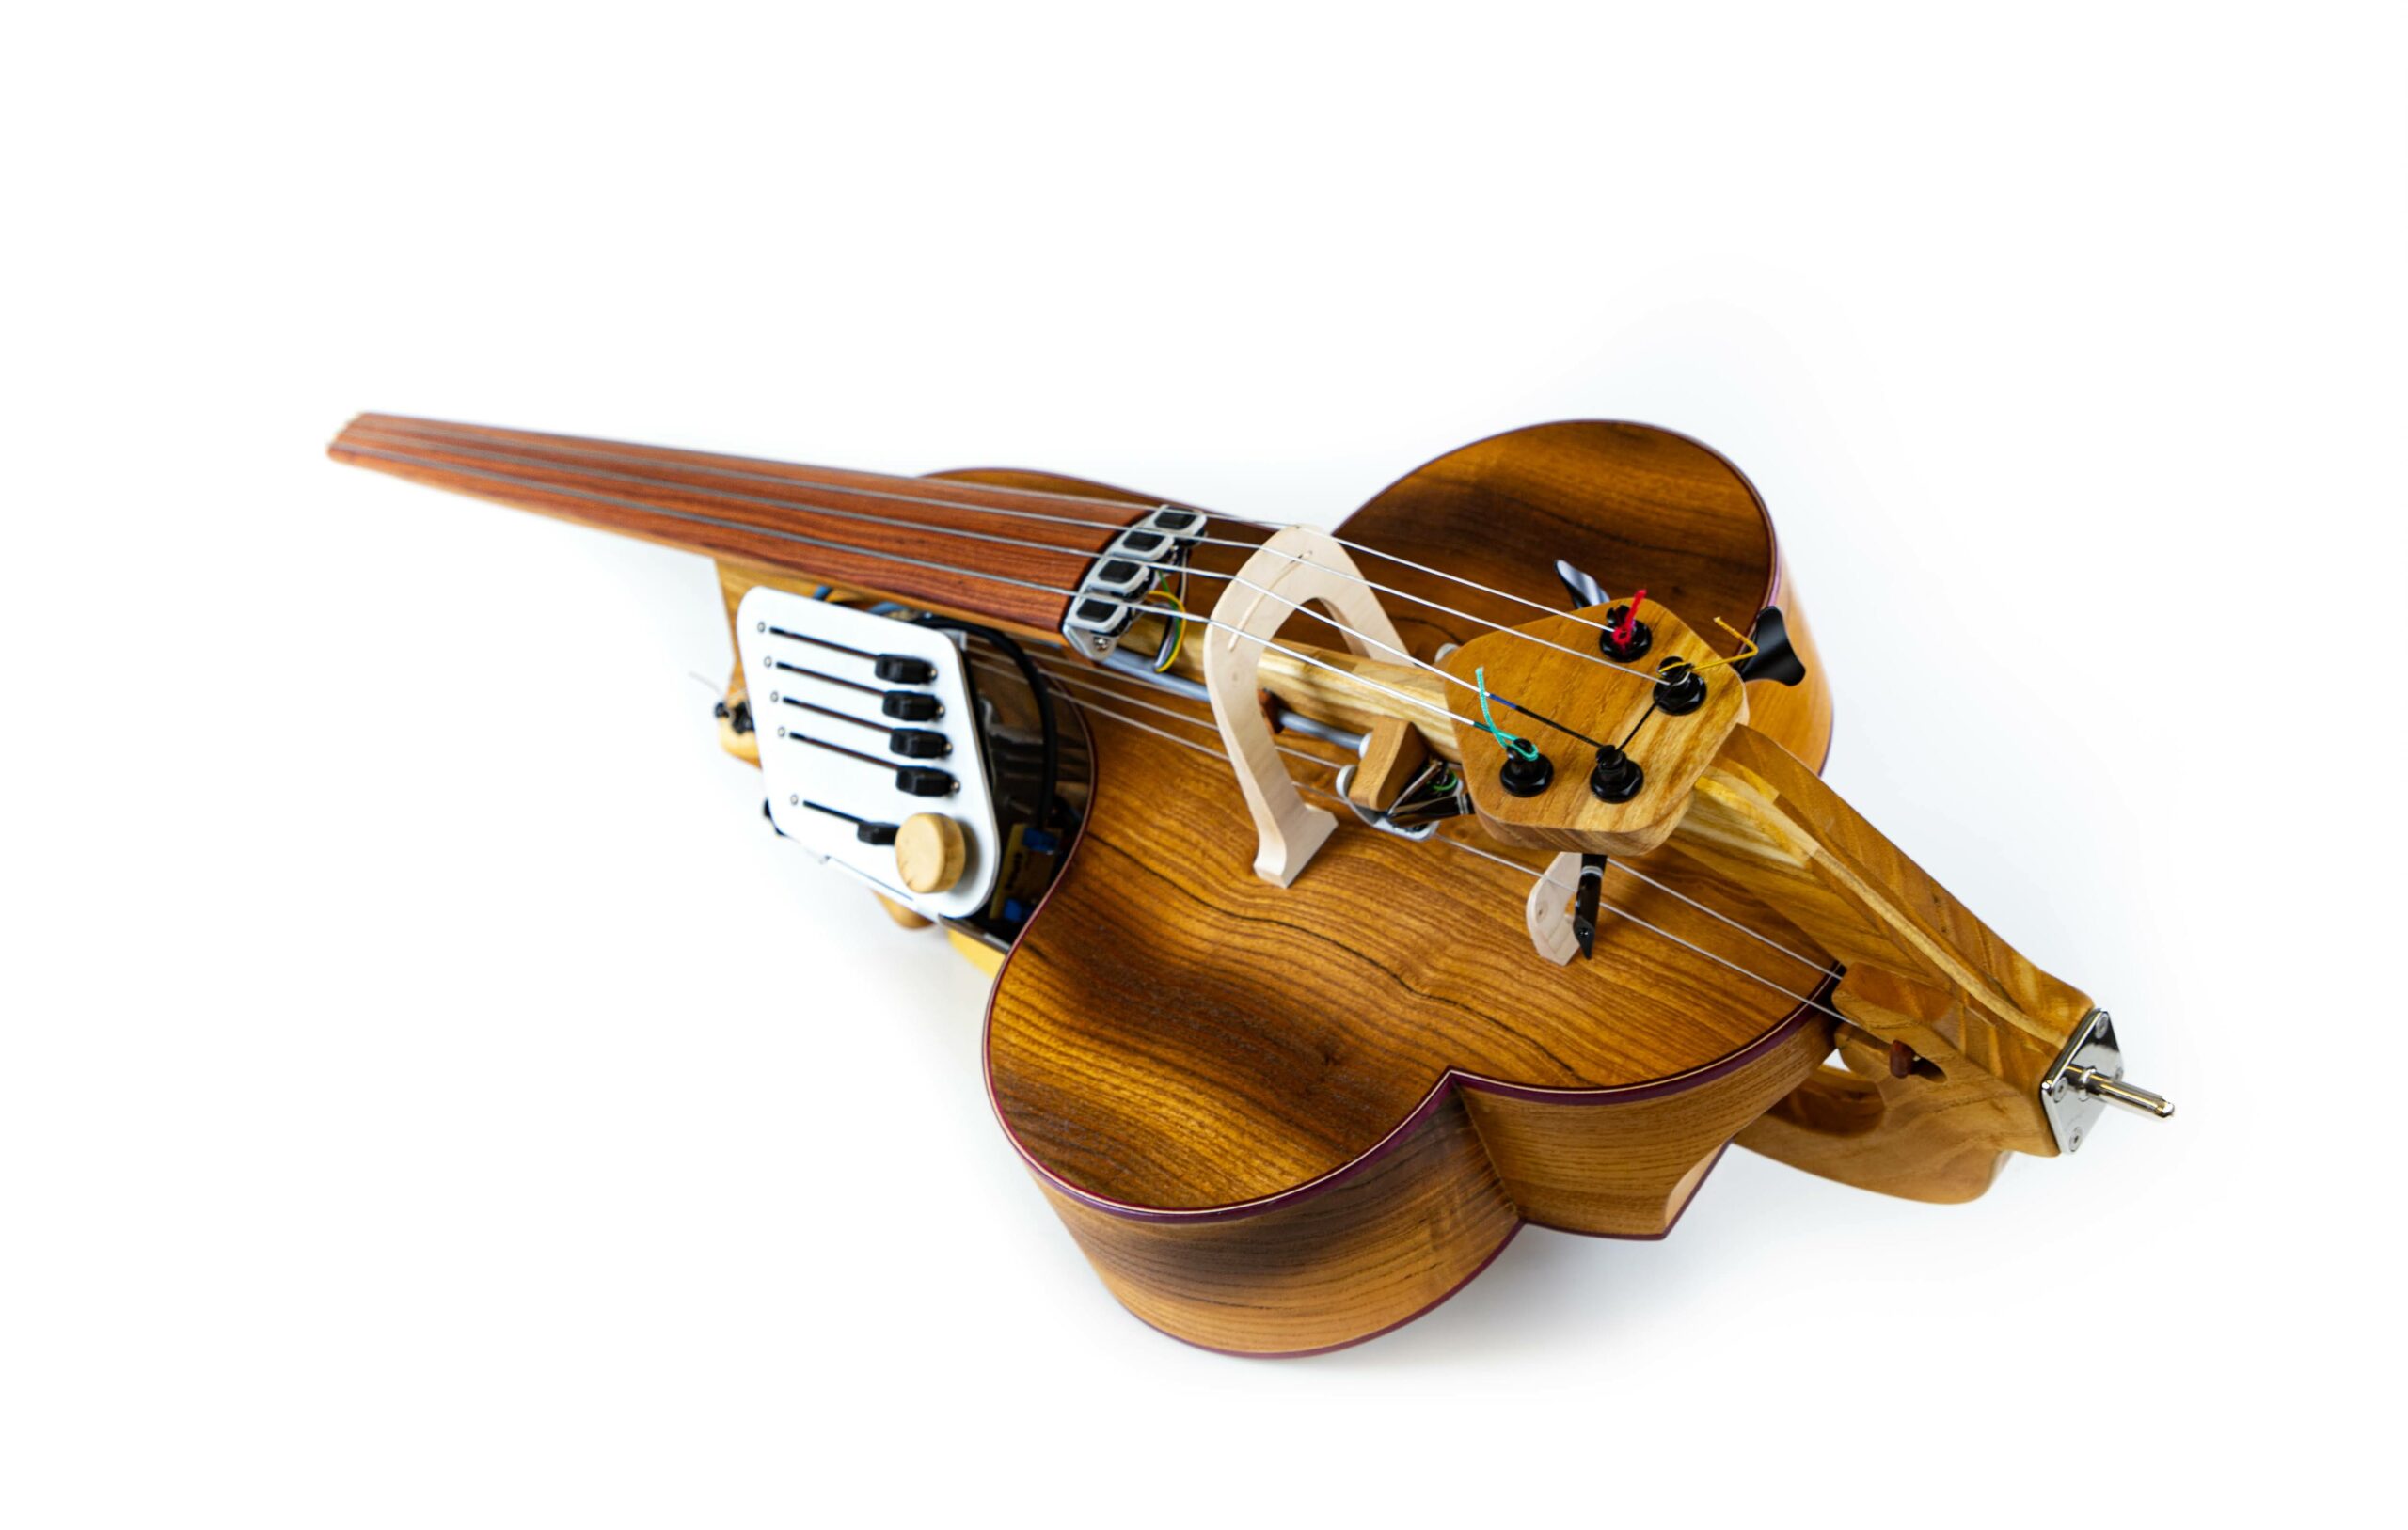 A wooden electronic instrument resembling a cello